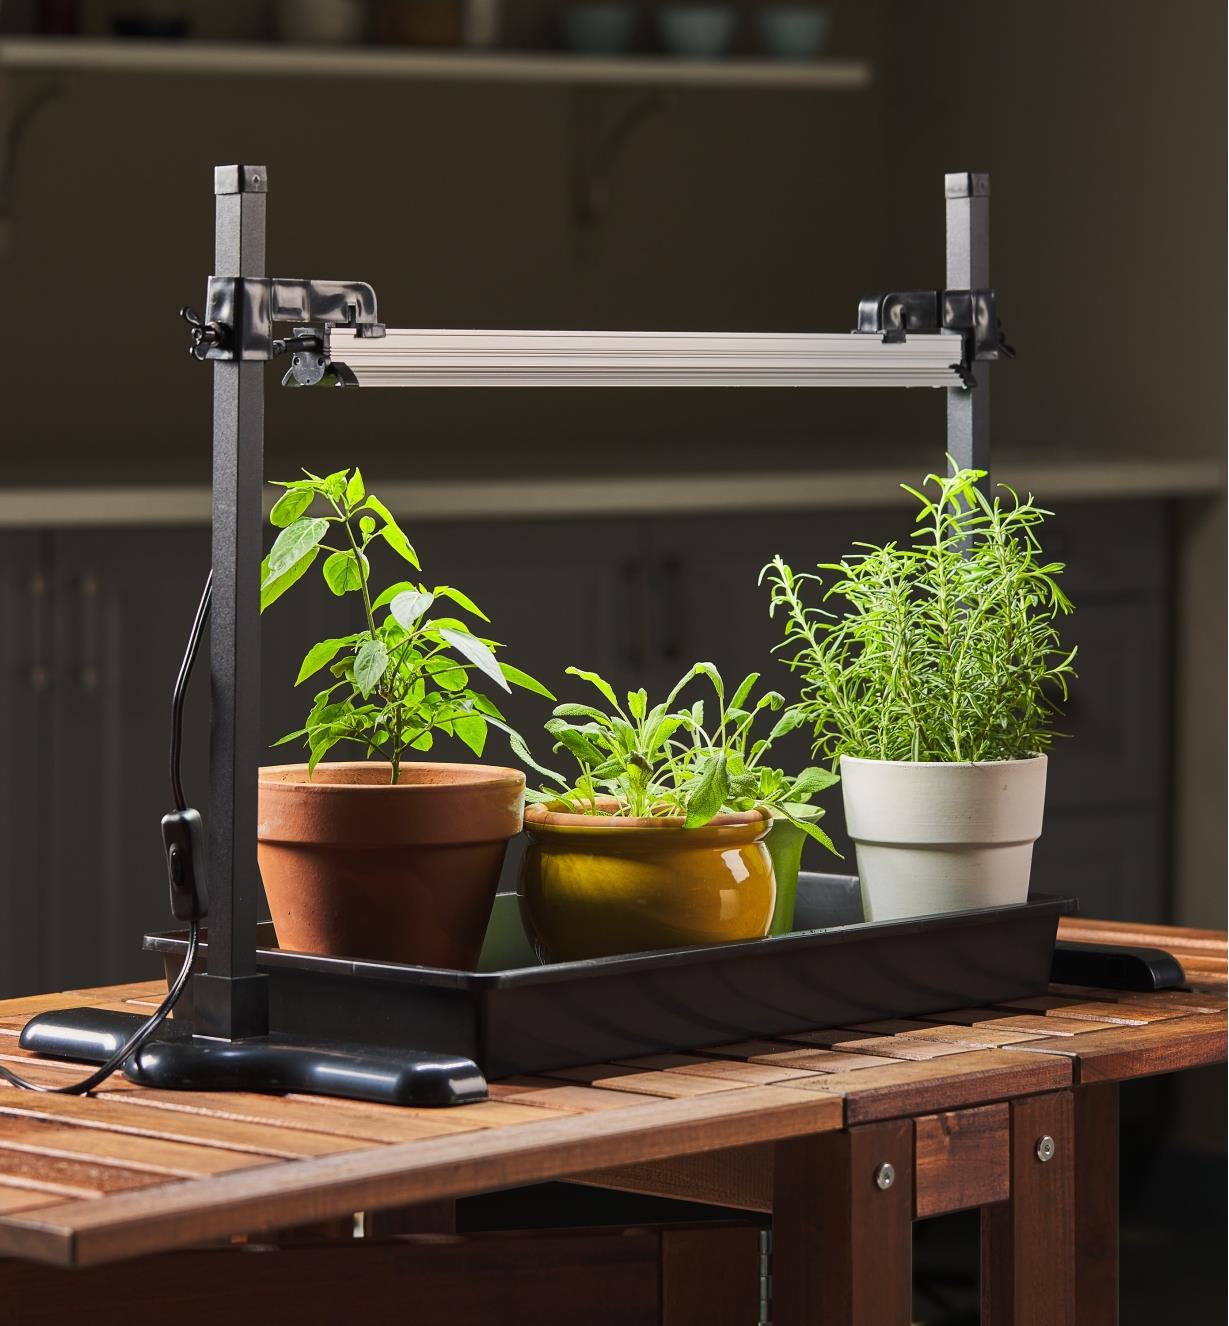 The LED grow light, stand and tray set used to grow a variety of potted herbs indoors